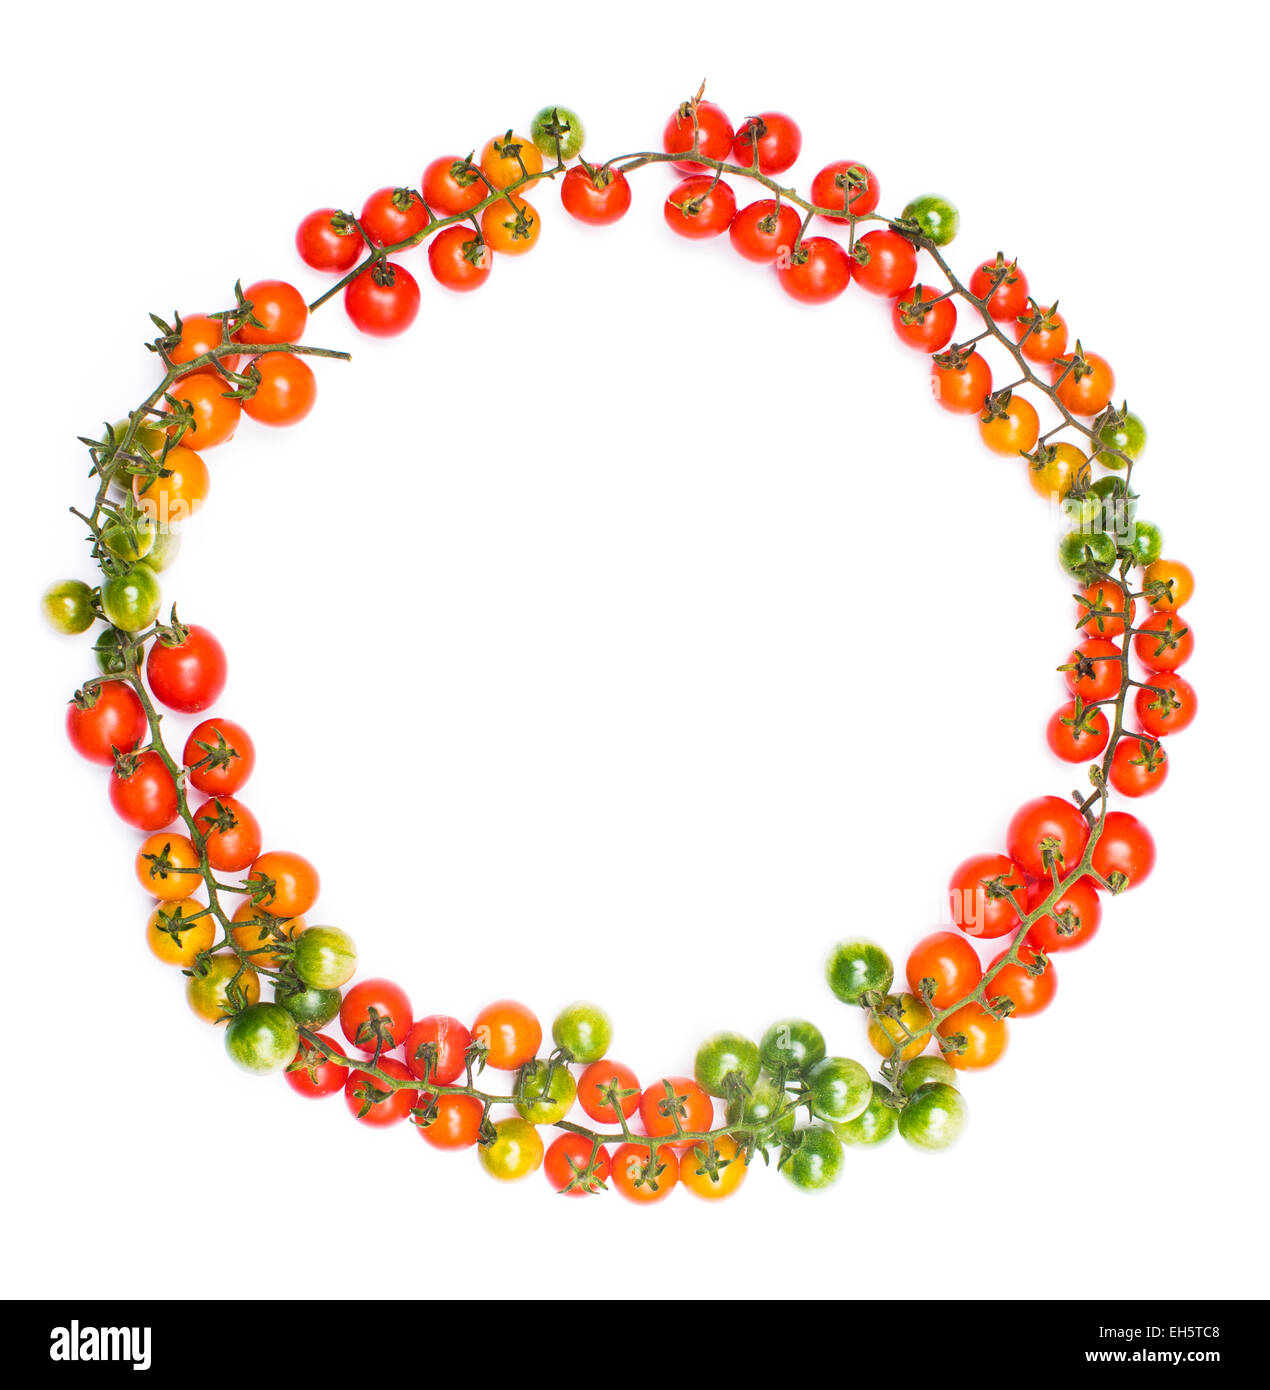 Healthy lifestyle cherry tomatoes circle shape concept on white Stock Photo